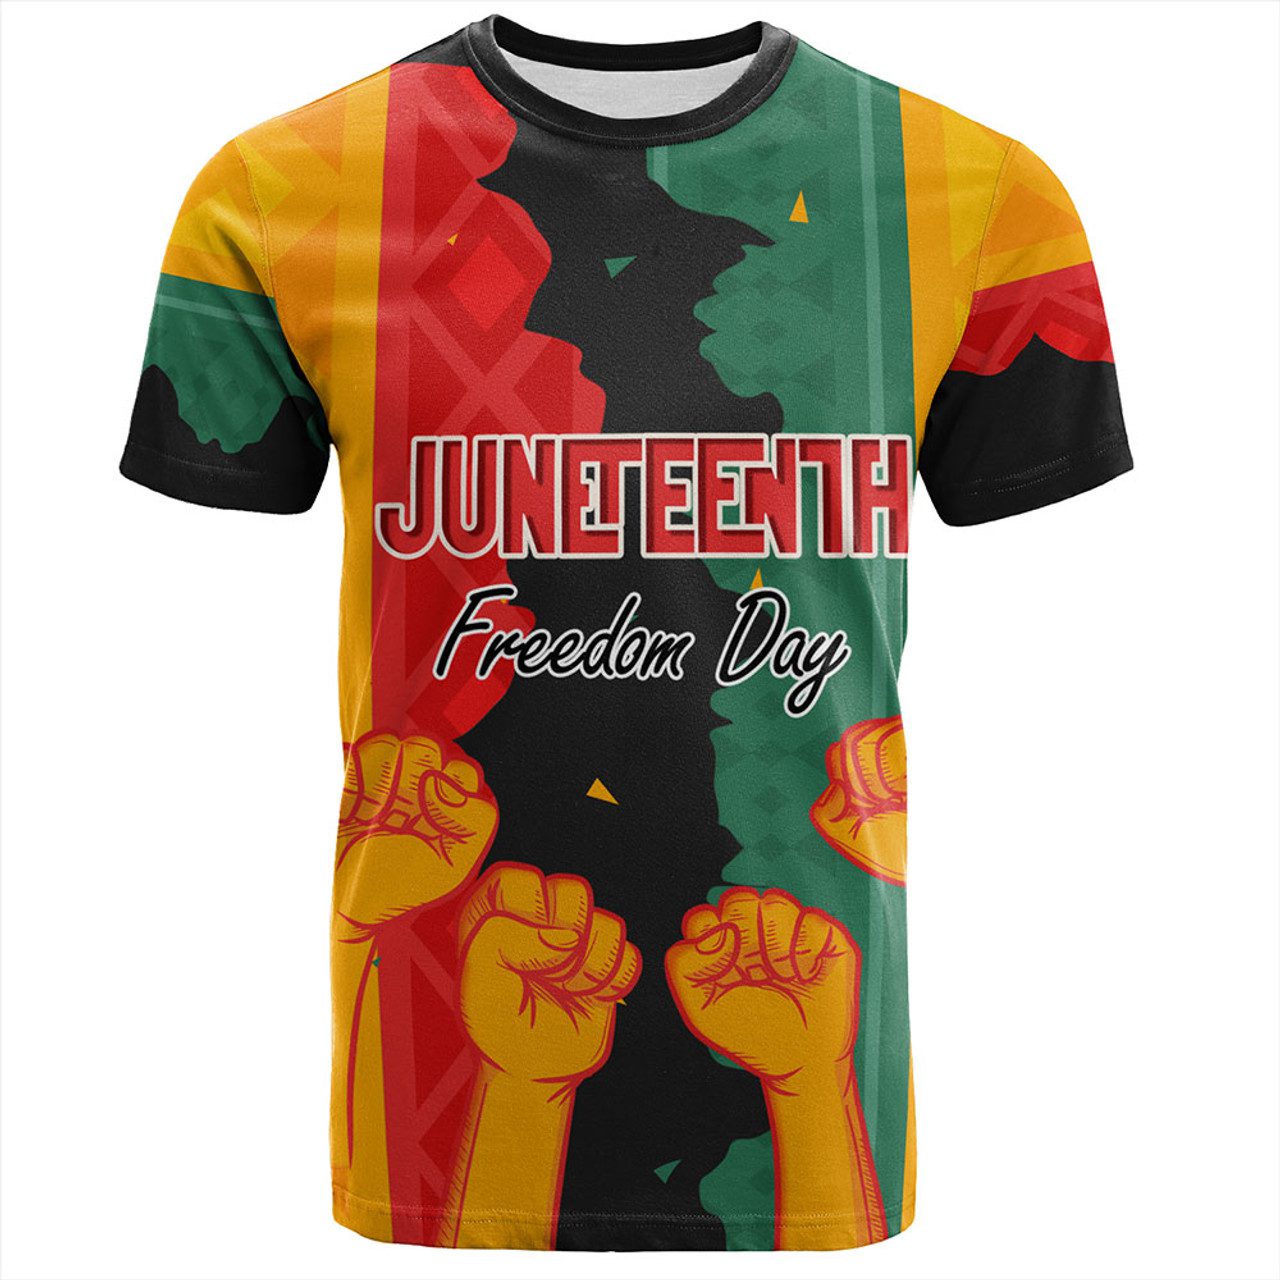 Juneteenth T-Shirt – Freedom Day Powers Hand